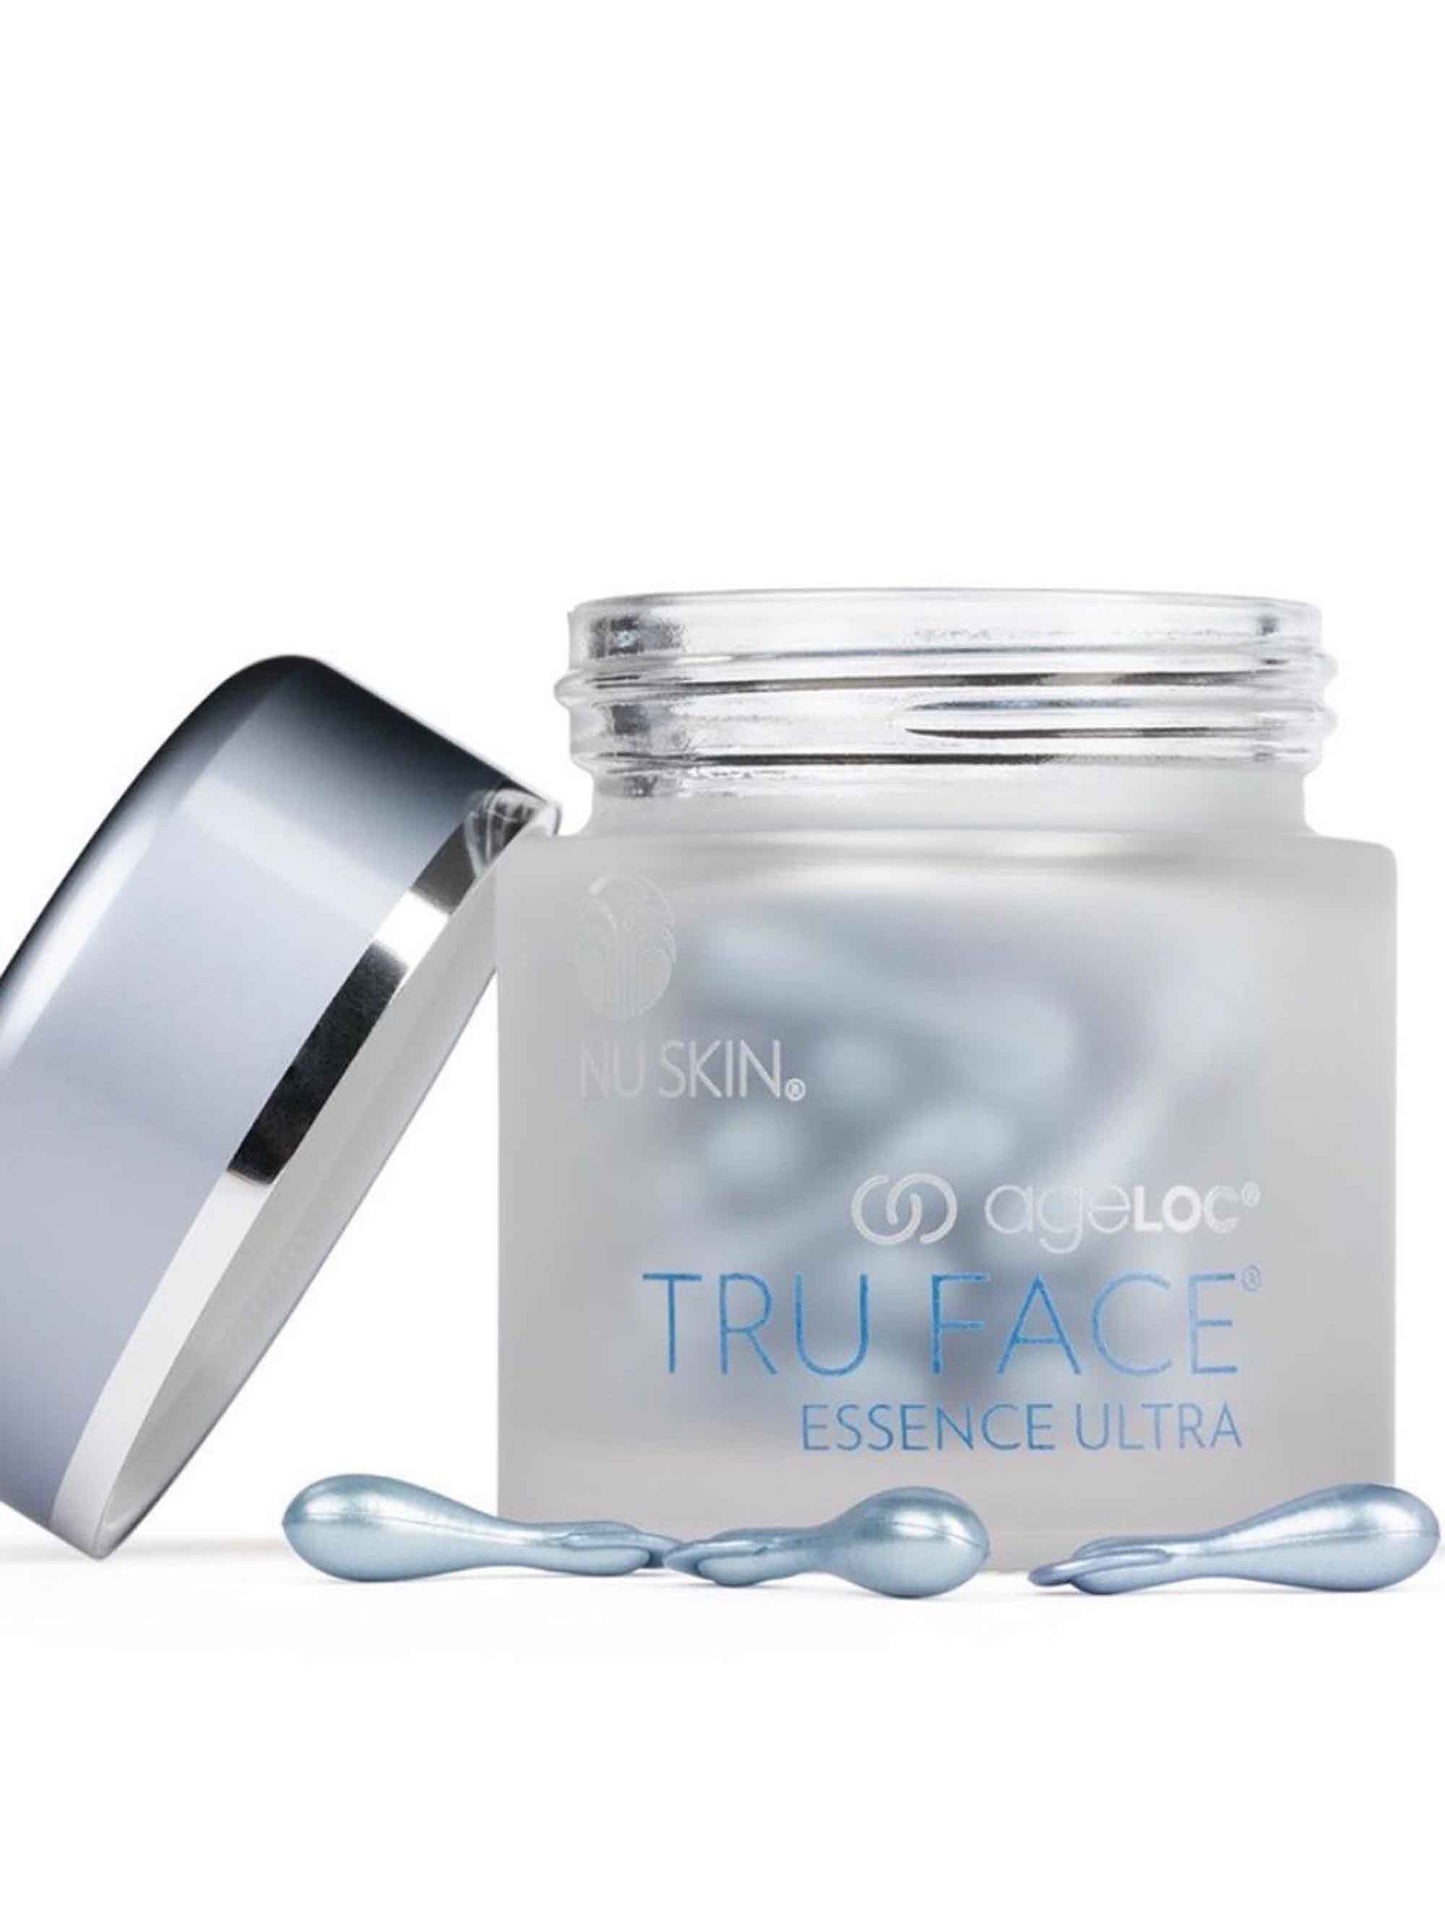 ageLOC® Tru Face® Essence Ultra-LAST DAY TO SAVE